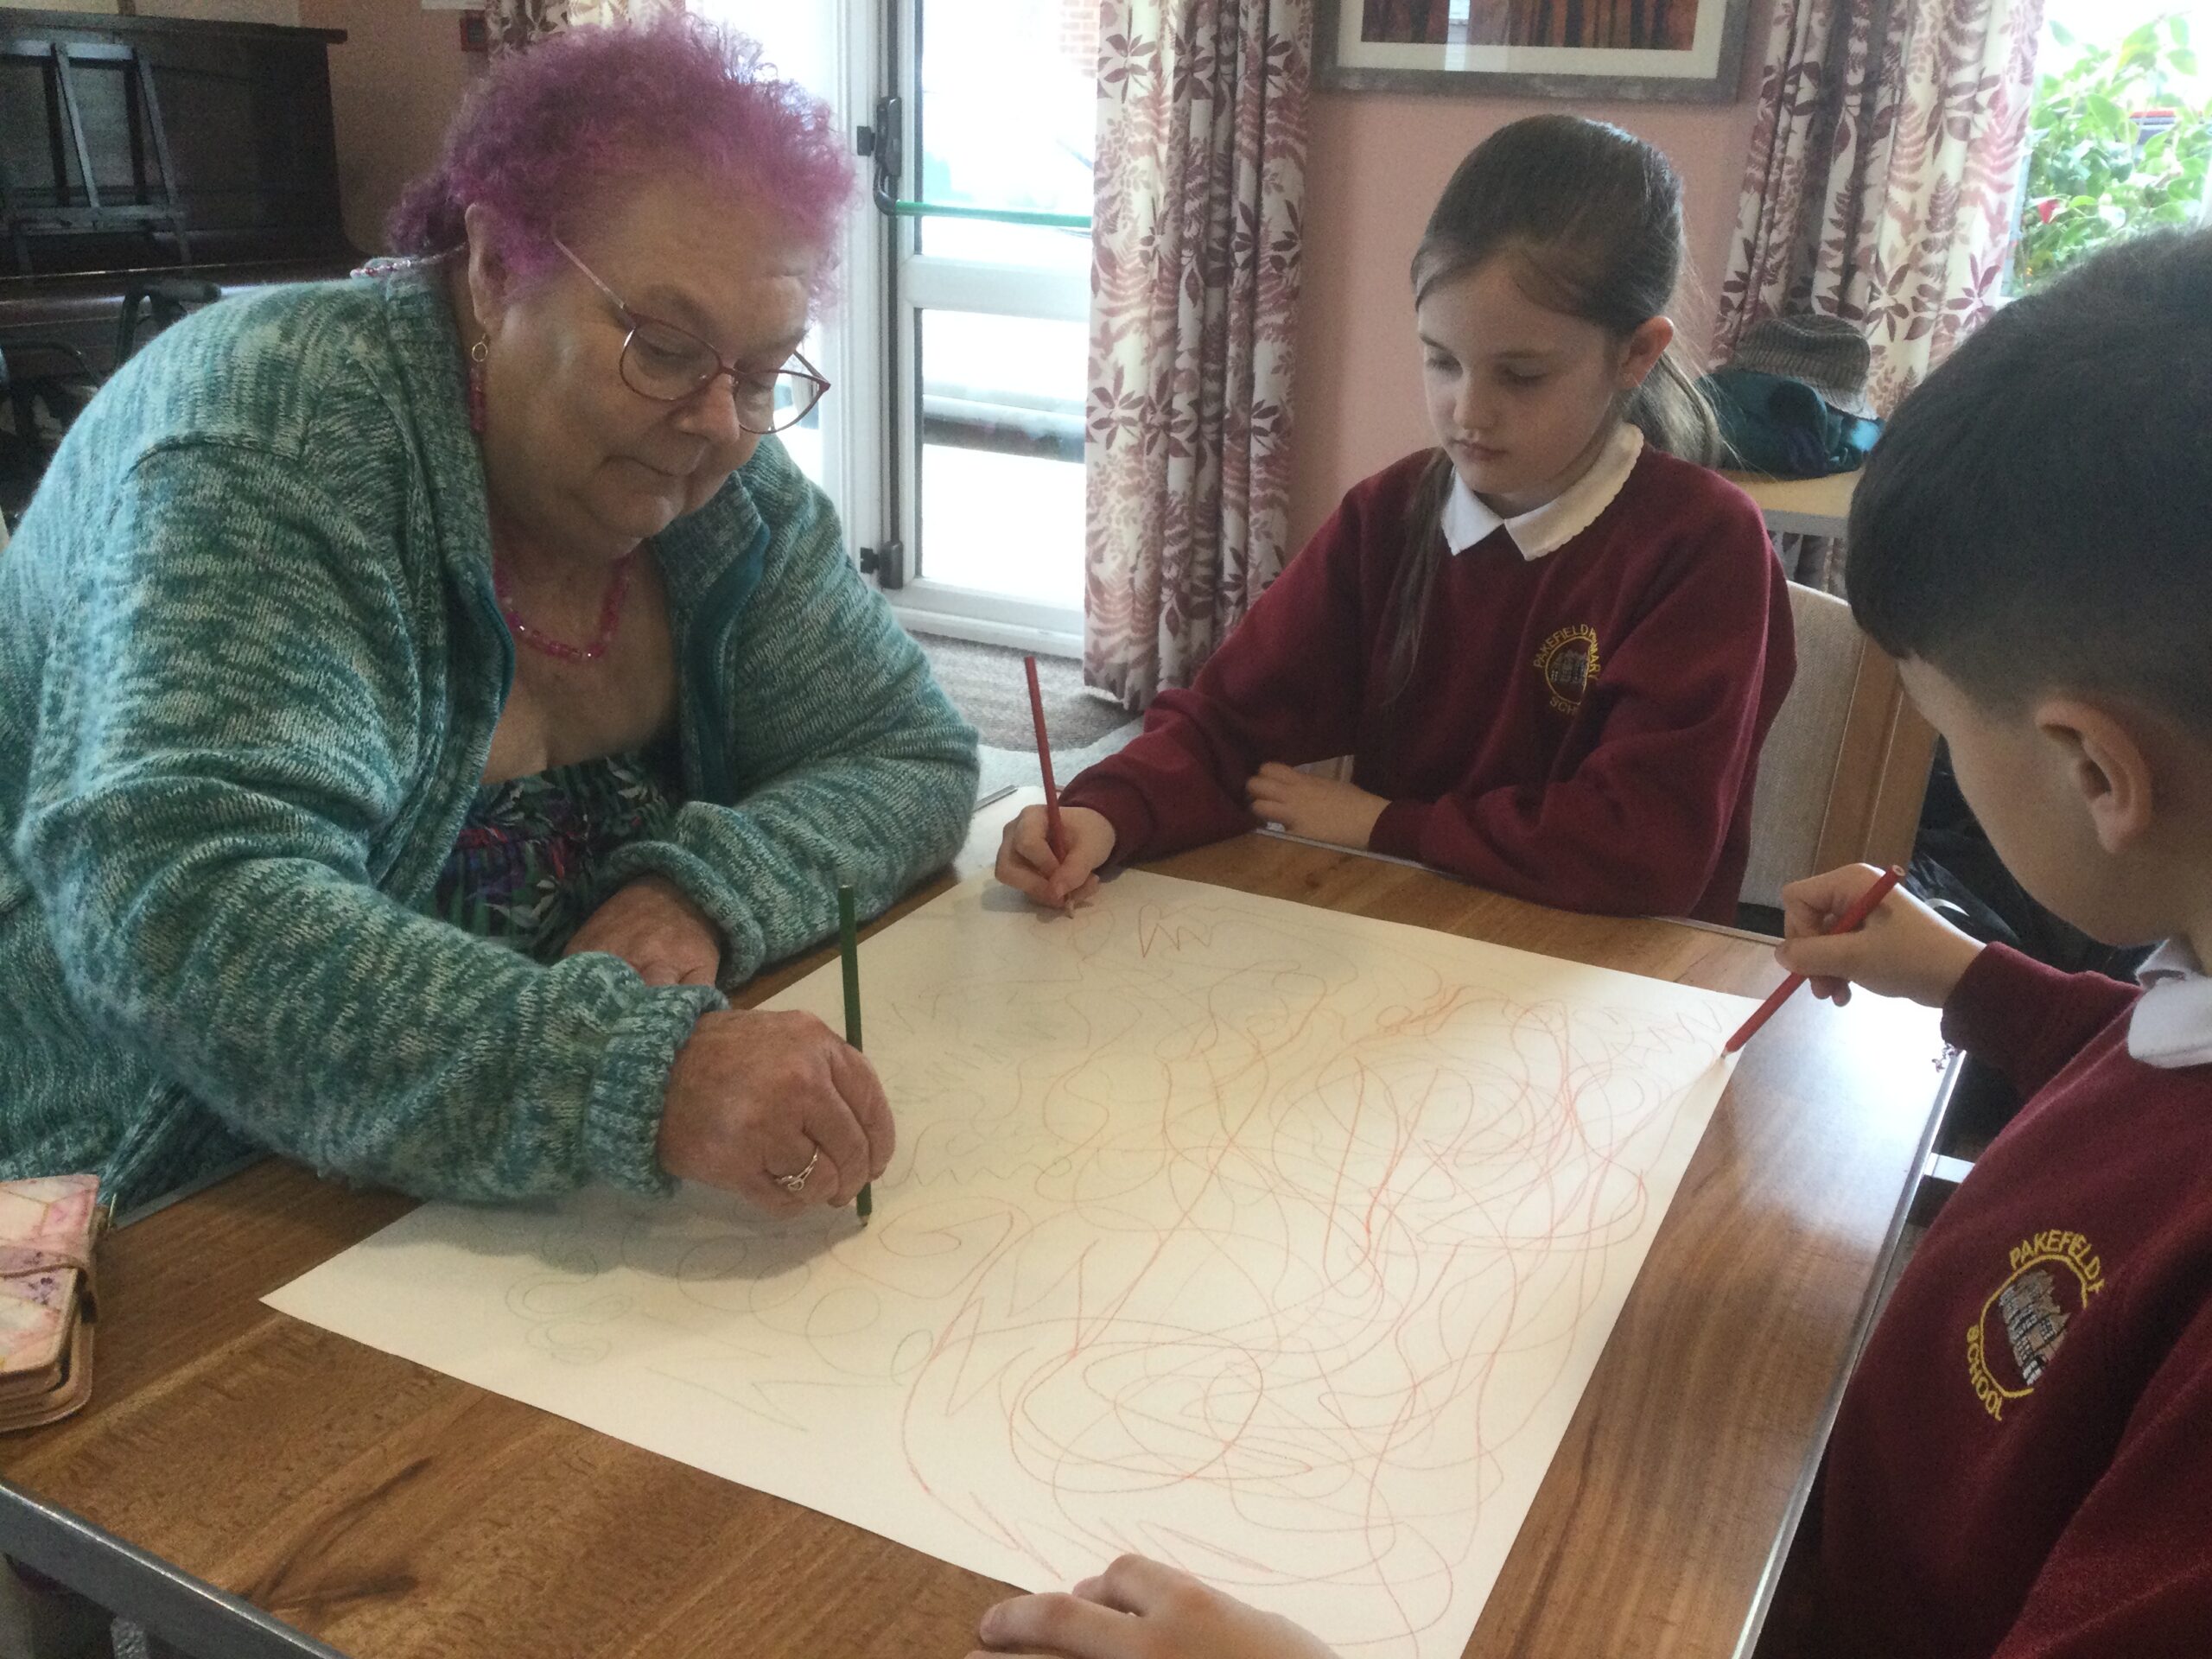 Two school children and an adult drawing random lines on a large piece of paper